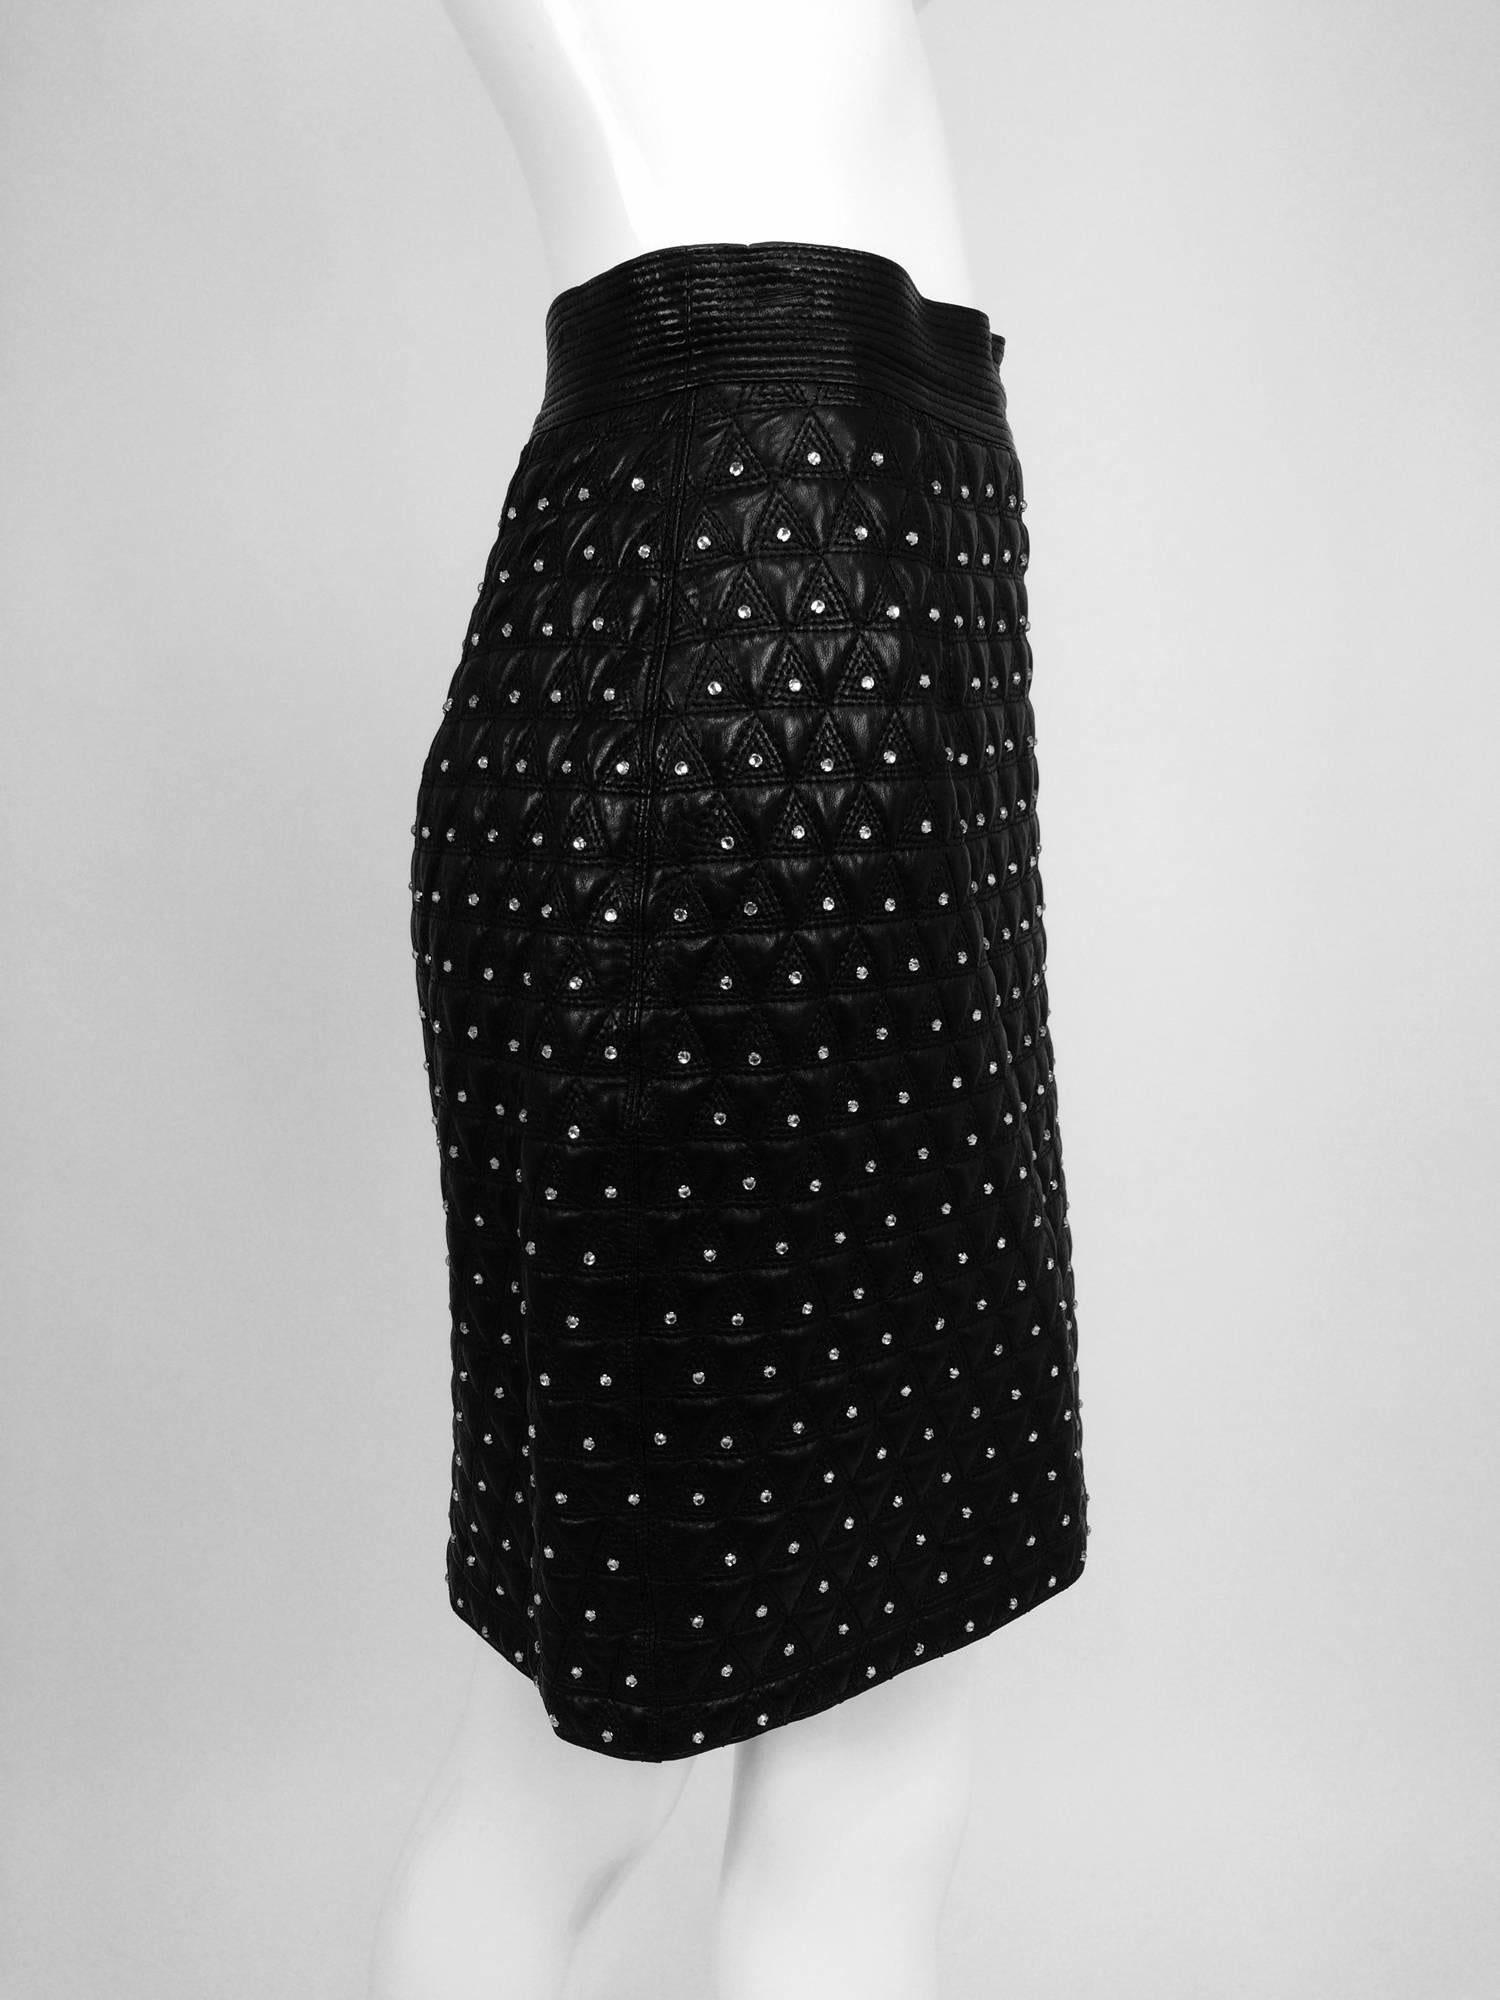 Black Gianni Versace Quilted black leather & rhinestone skirt 1980s